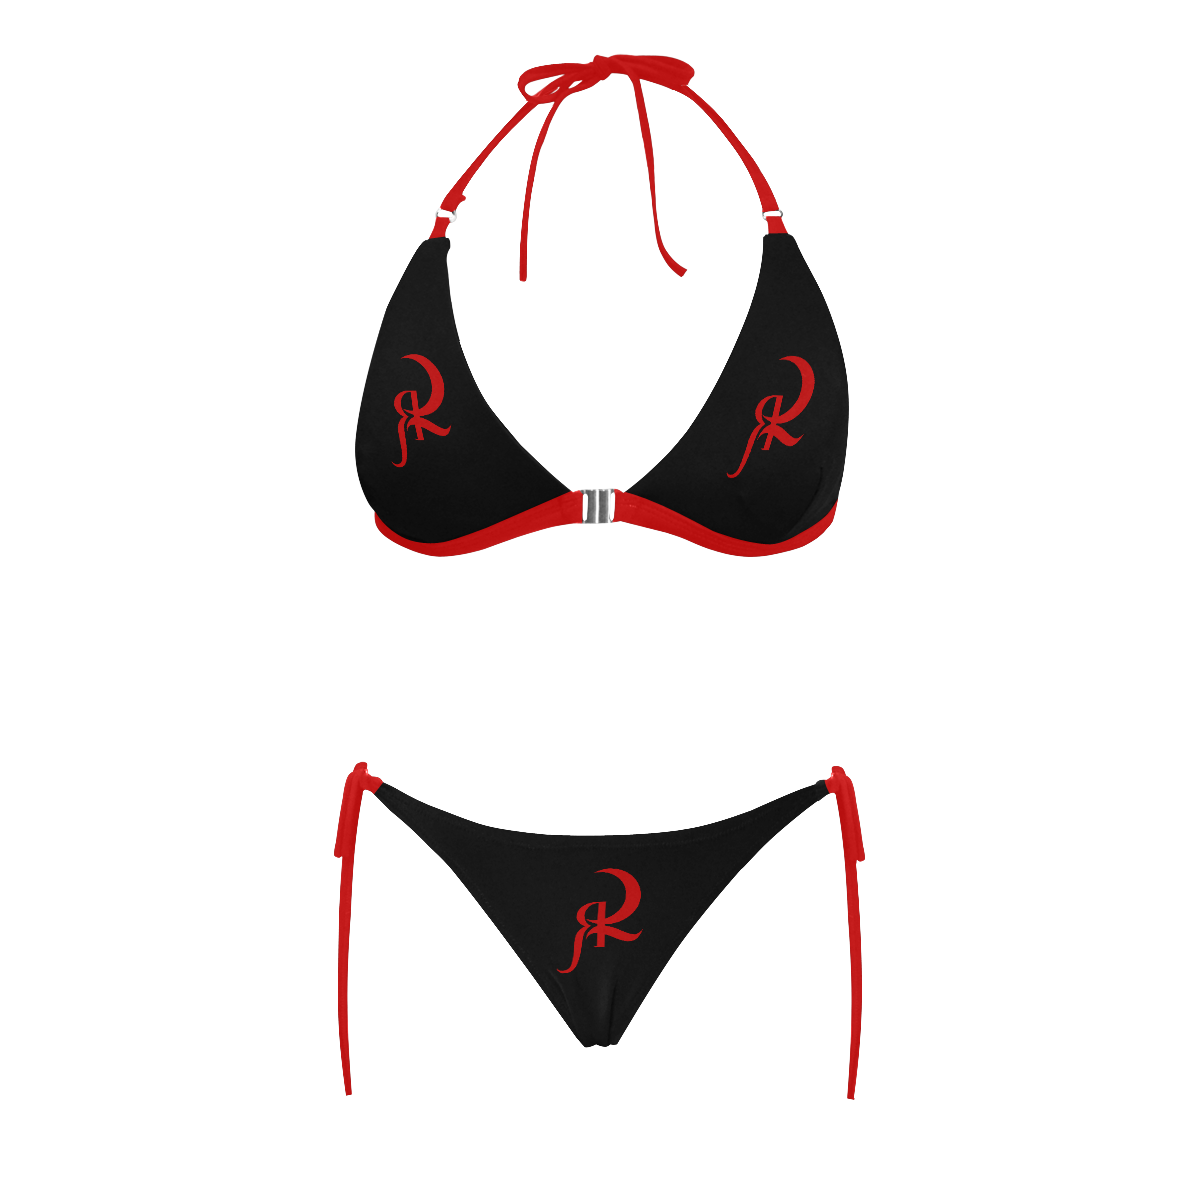 RED QUEEN SYMBOL RED & BLACK RED LINING Buckle Front Halter Bikini Swimsuit (Model S08)